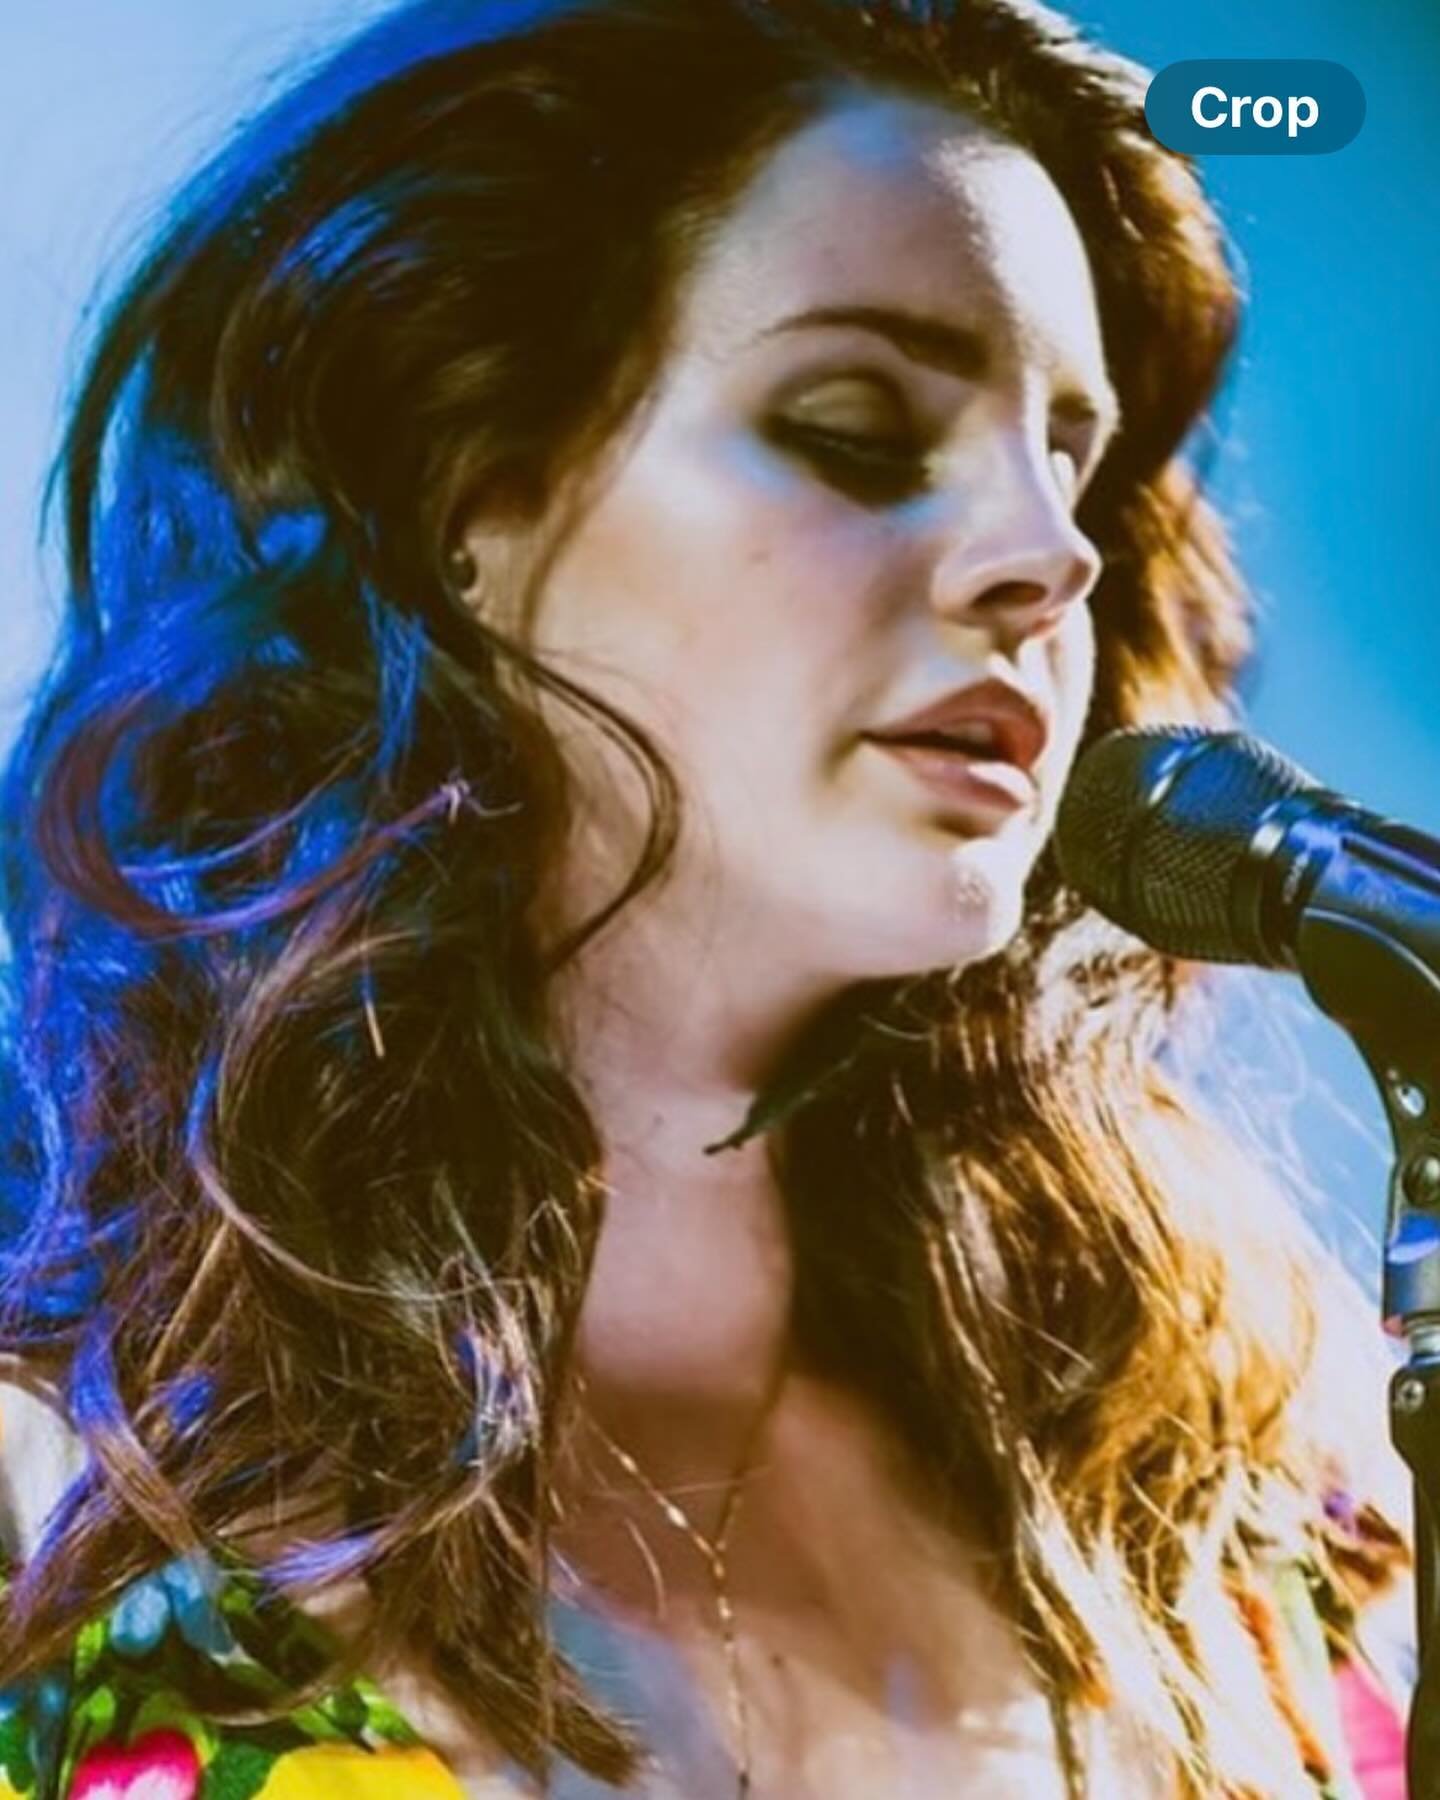 If you can&rsquo;t make it to Coachella to see Lana del Rey rock, you can smell like her with our perfumes that she loves and wears! Have an amazing show @honeymoon!! Rooting you on, always. 😘💫❤️ #lanadelrey #firestonesisters #coachella #naturalper